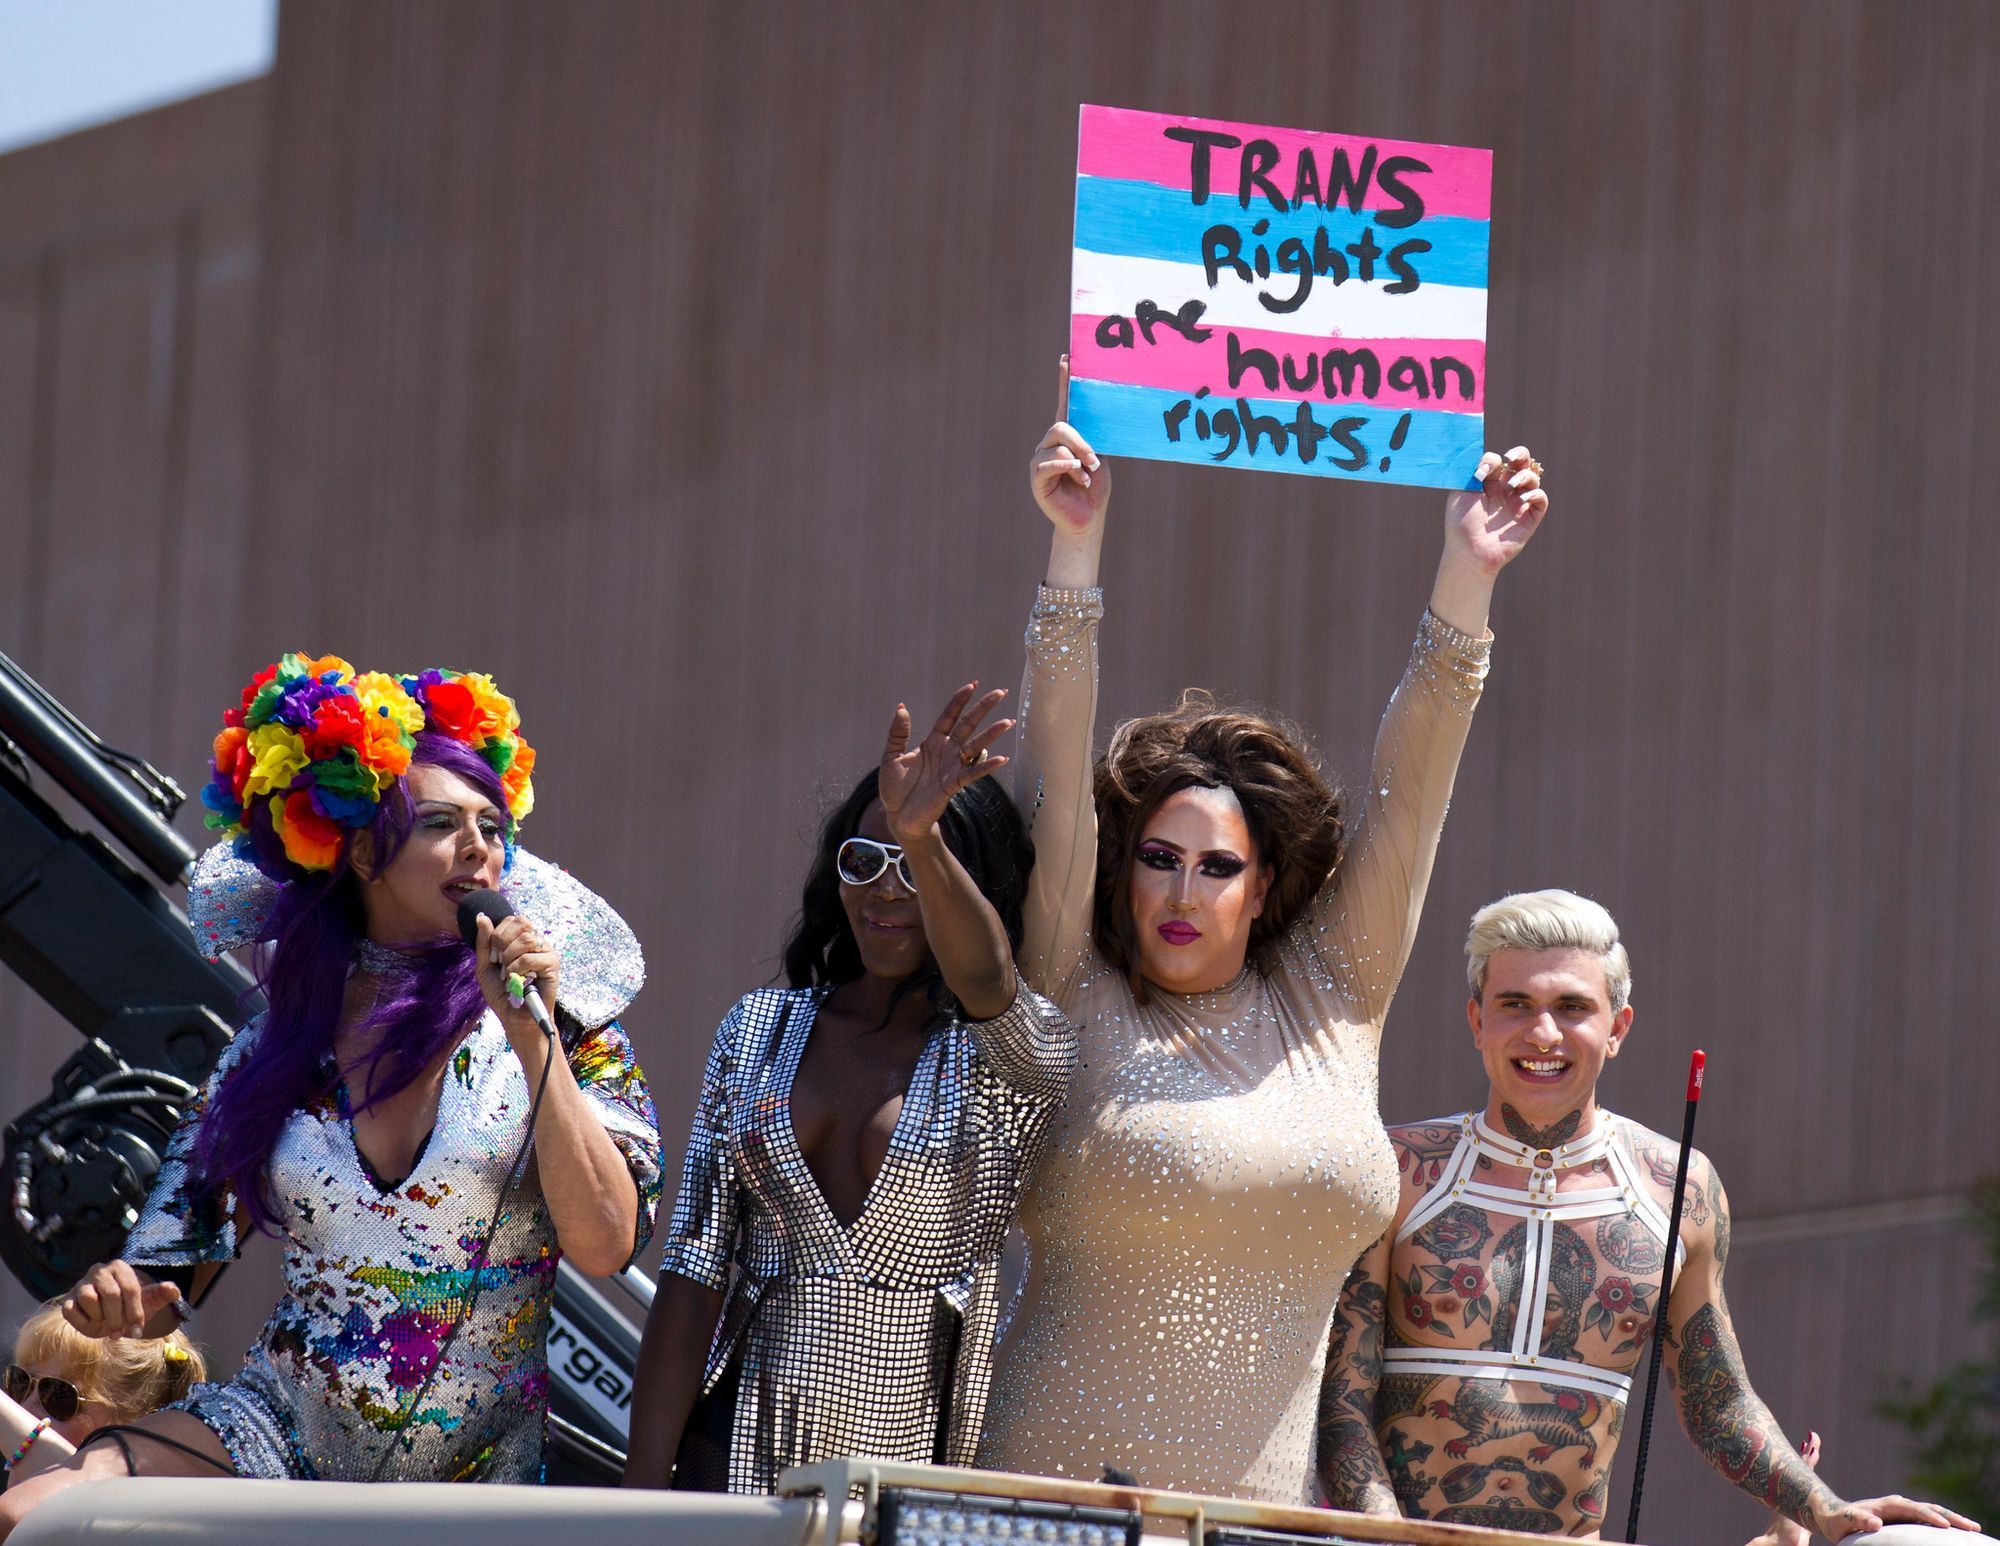 The NYT Refuses to Part With Transphobia, and More Notes on Hypocrisy